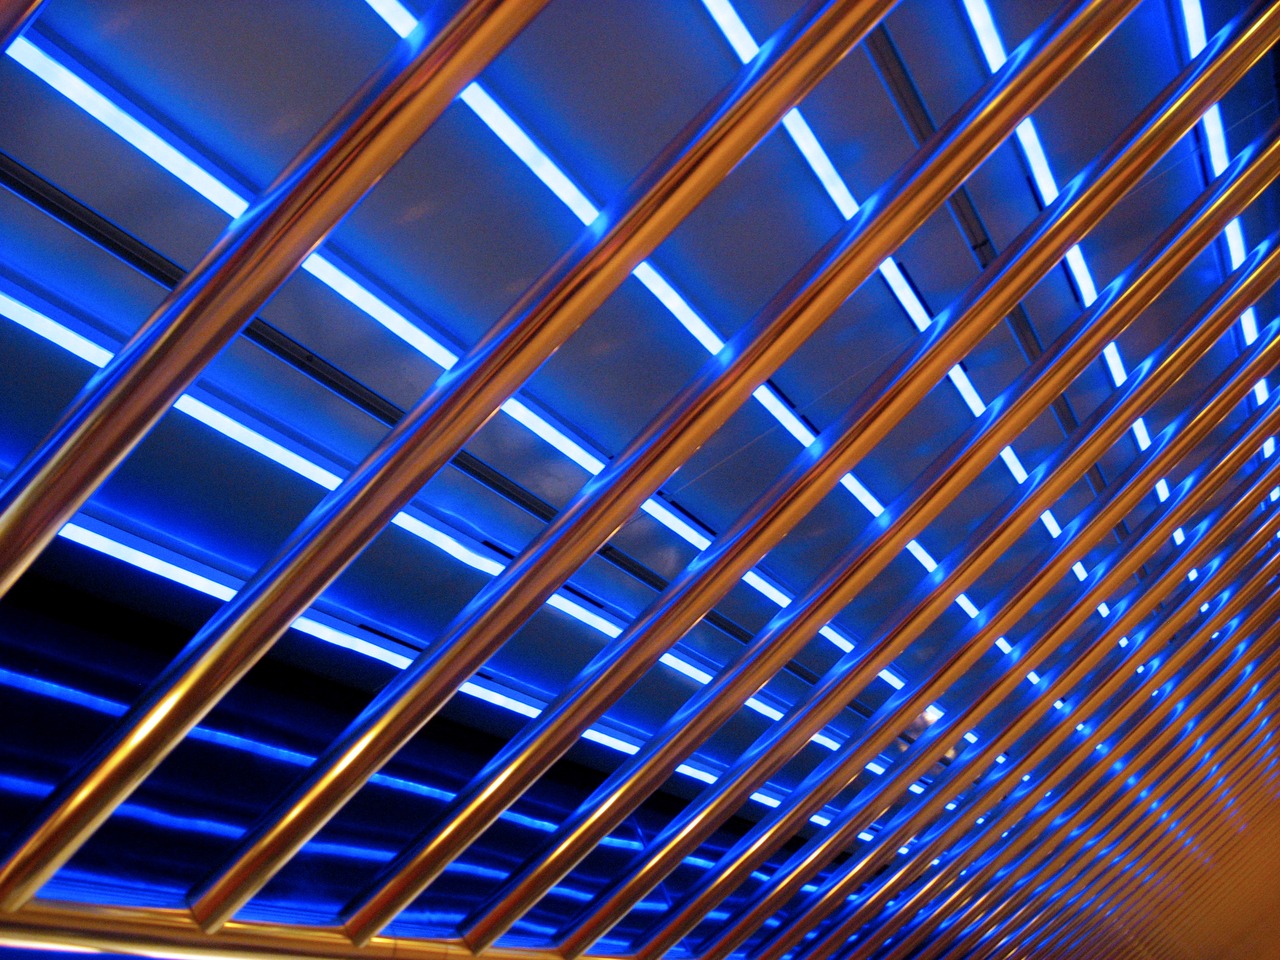 Blue neon lights behind metal bars above the Deck 10 starboard interior corridor near the Seaview Bar & Grill on Carnival Sensation.